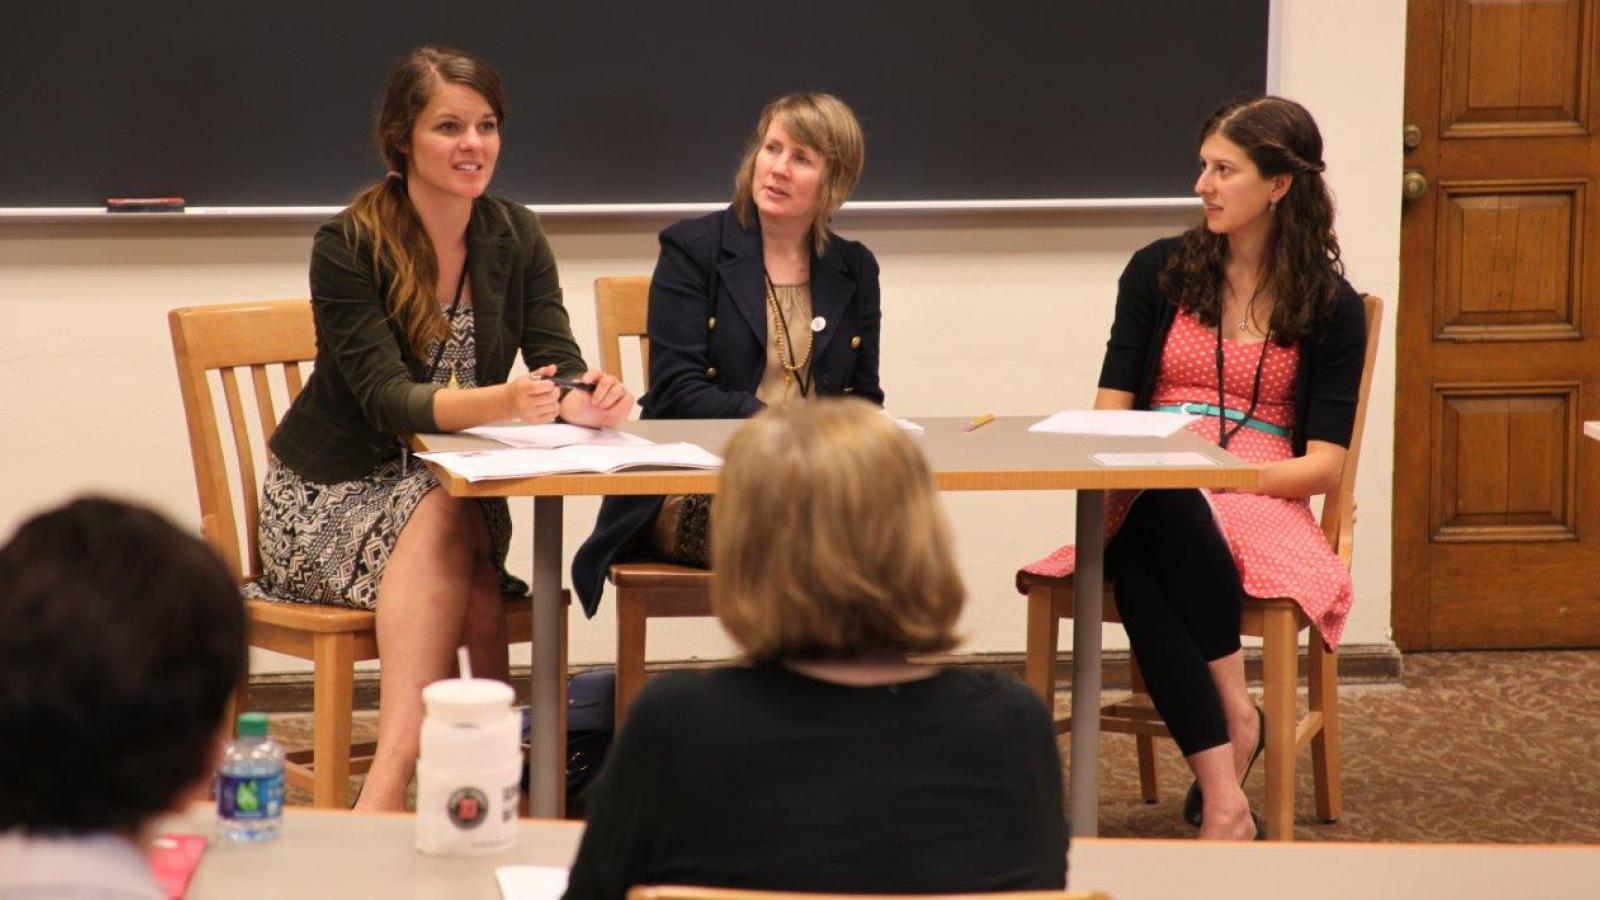 Maggie Lou Rader, Jacqui O'Hanlon, and Elizabeth Harelik discuss youth Shakespeare programs at the 2015 Shakespeare and Education Festival.